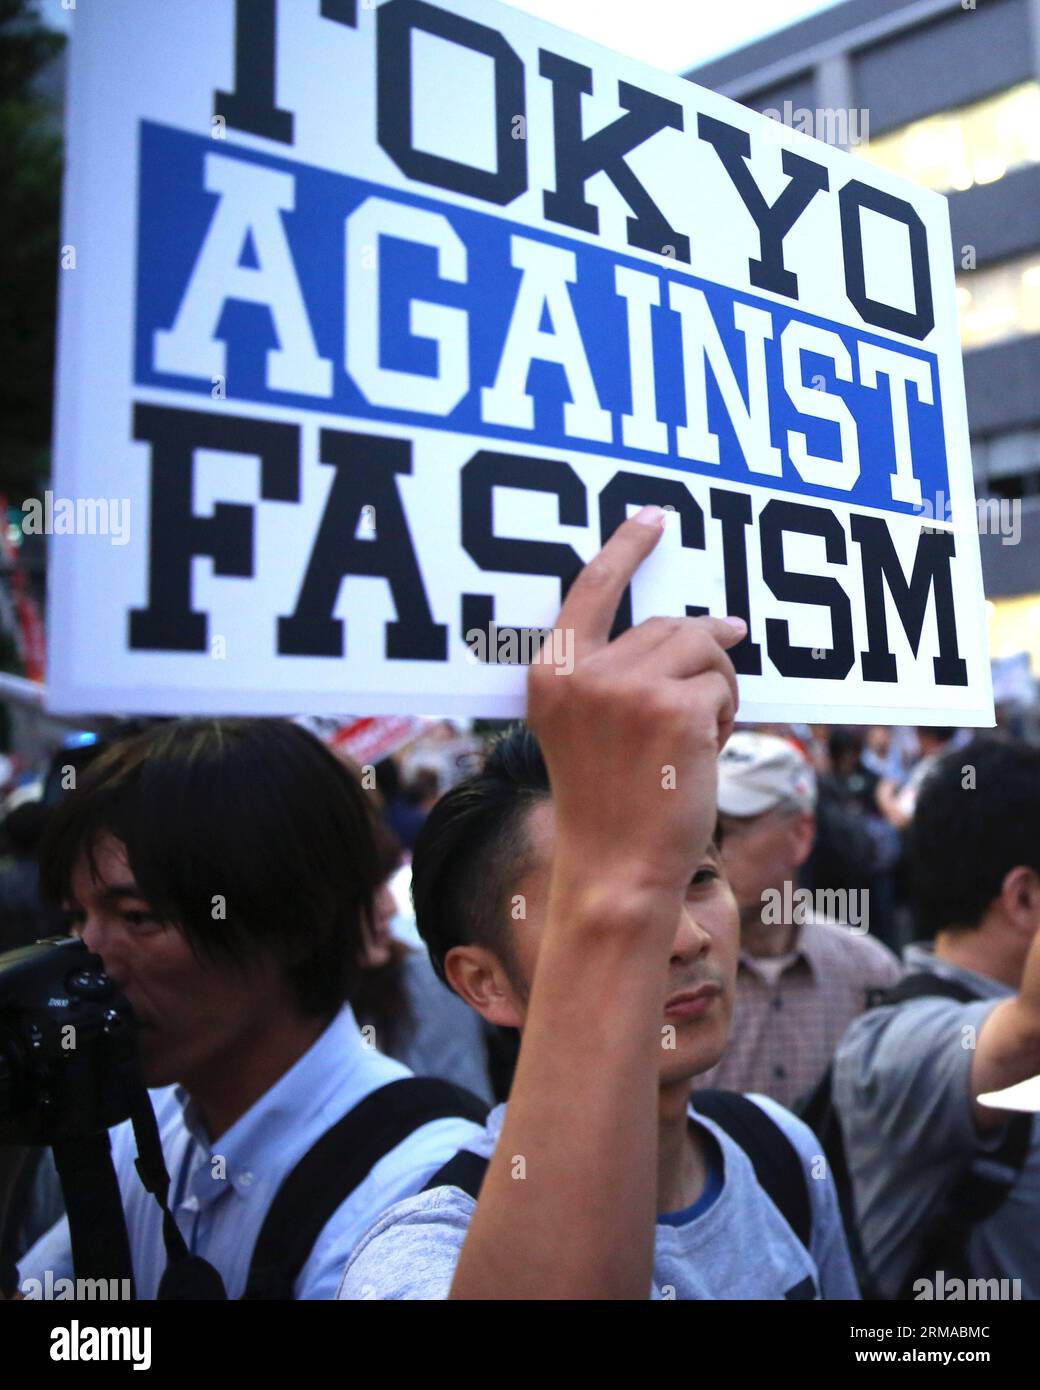 (140630) -- TOKYO, June 30, 2014 (Xinhua) -- A protester holds a banner during a rally to protest against the attempt to exercise the rights to collective self-defense in front of the Prime Minister s official residence in Tokyo, Japan, June 30, 2014. Thousands of Japanese people gathered here Monday, protesting against Japanese Prime Minister Shinzo Abe s attempt to allow Japan s Self-Defense Forces (SDF) to exercise the rights to collective self-defense. The Japanese government sought to get a green light from the Cabinet on July 1 for a resolution that will allow Japan to exercise collectiv Stock Photo